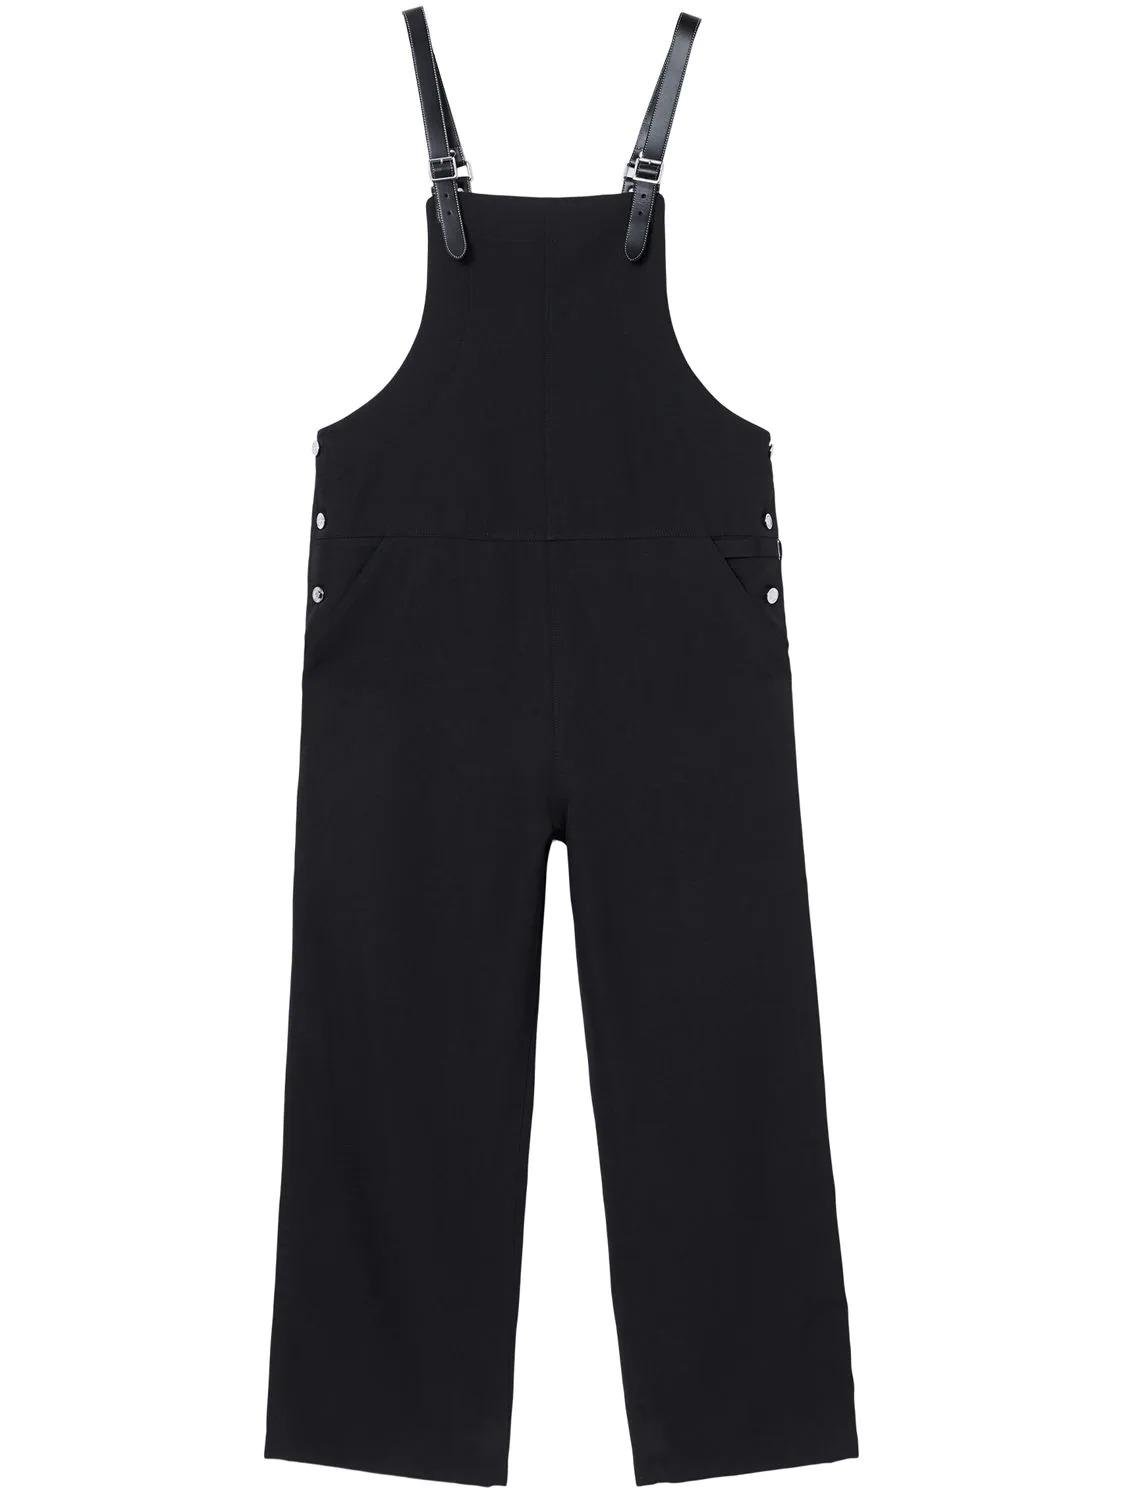 Burberry Mens Black Bib-Front Technical Overalls by BURBERRY